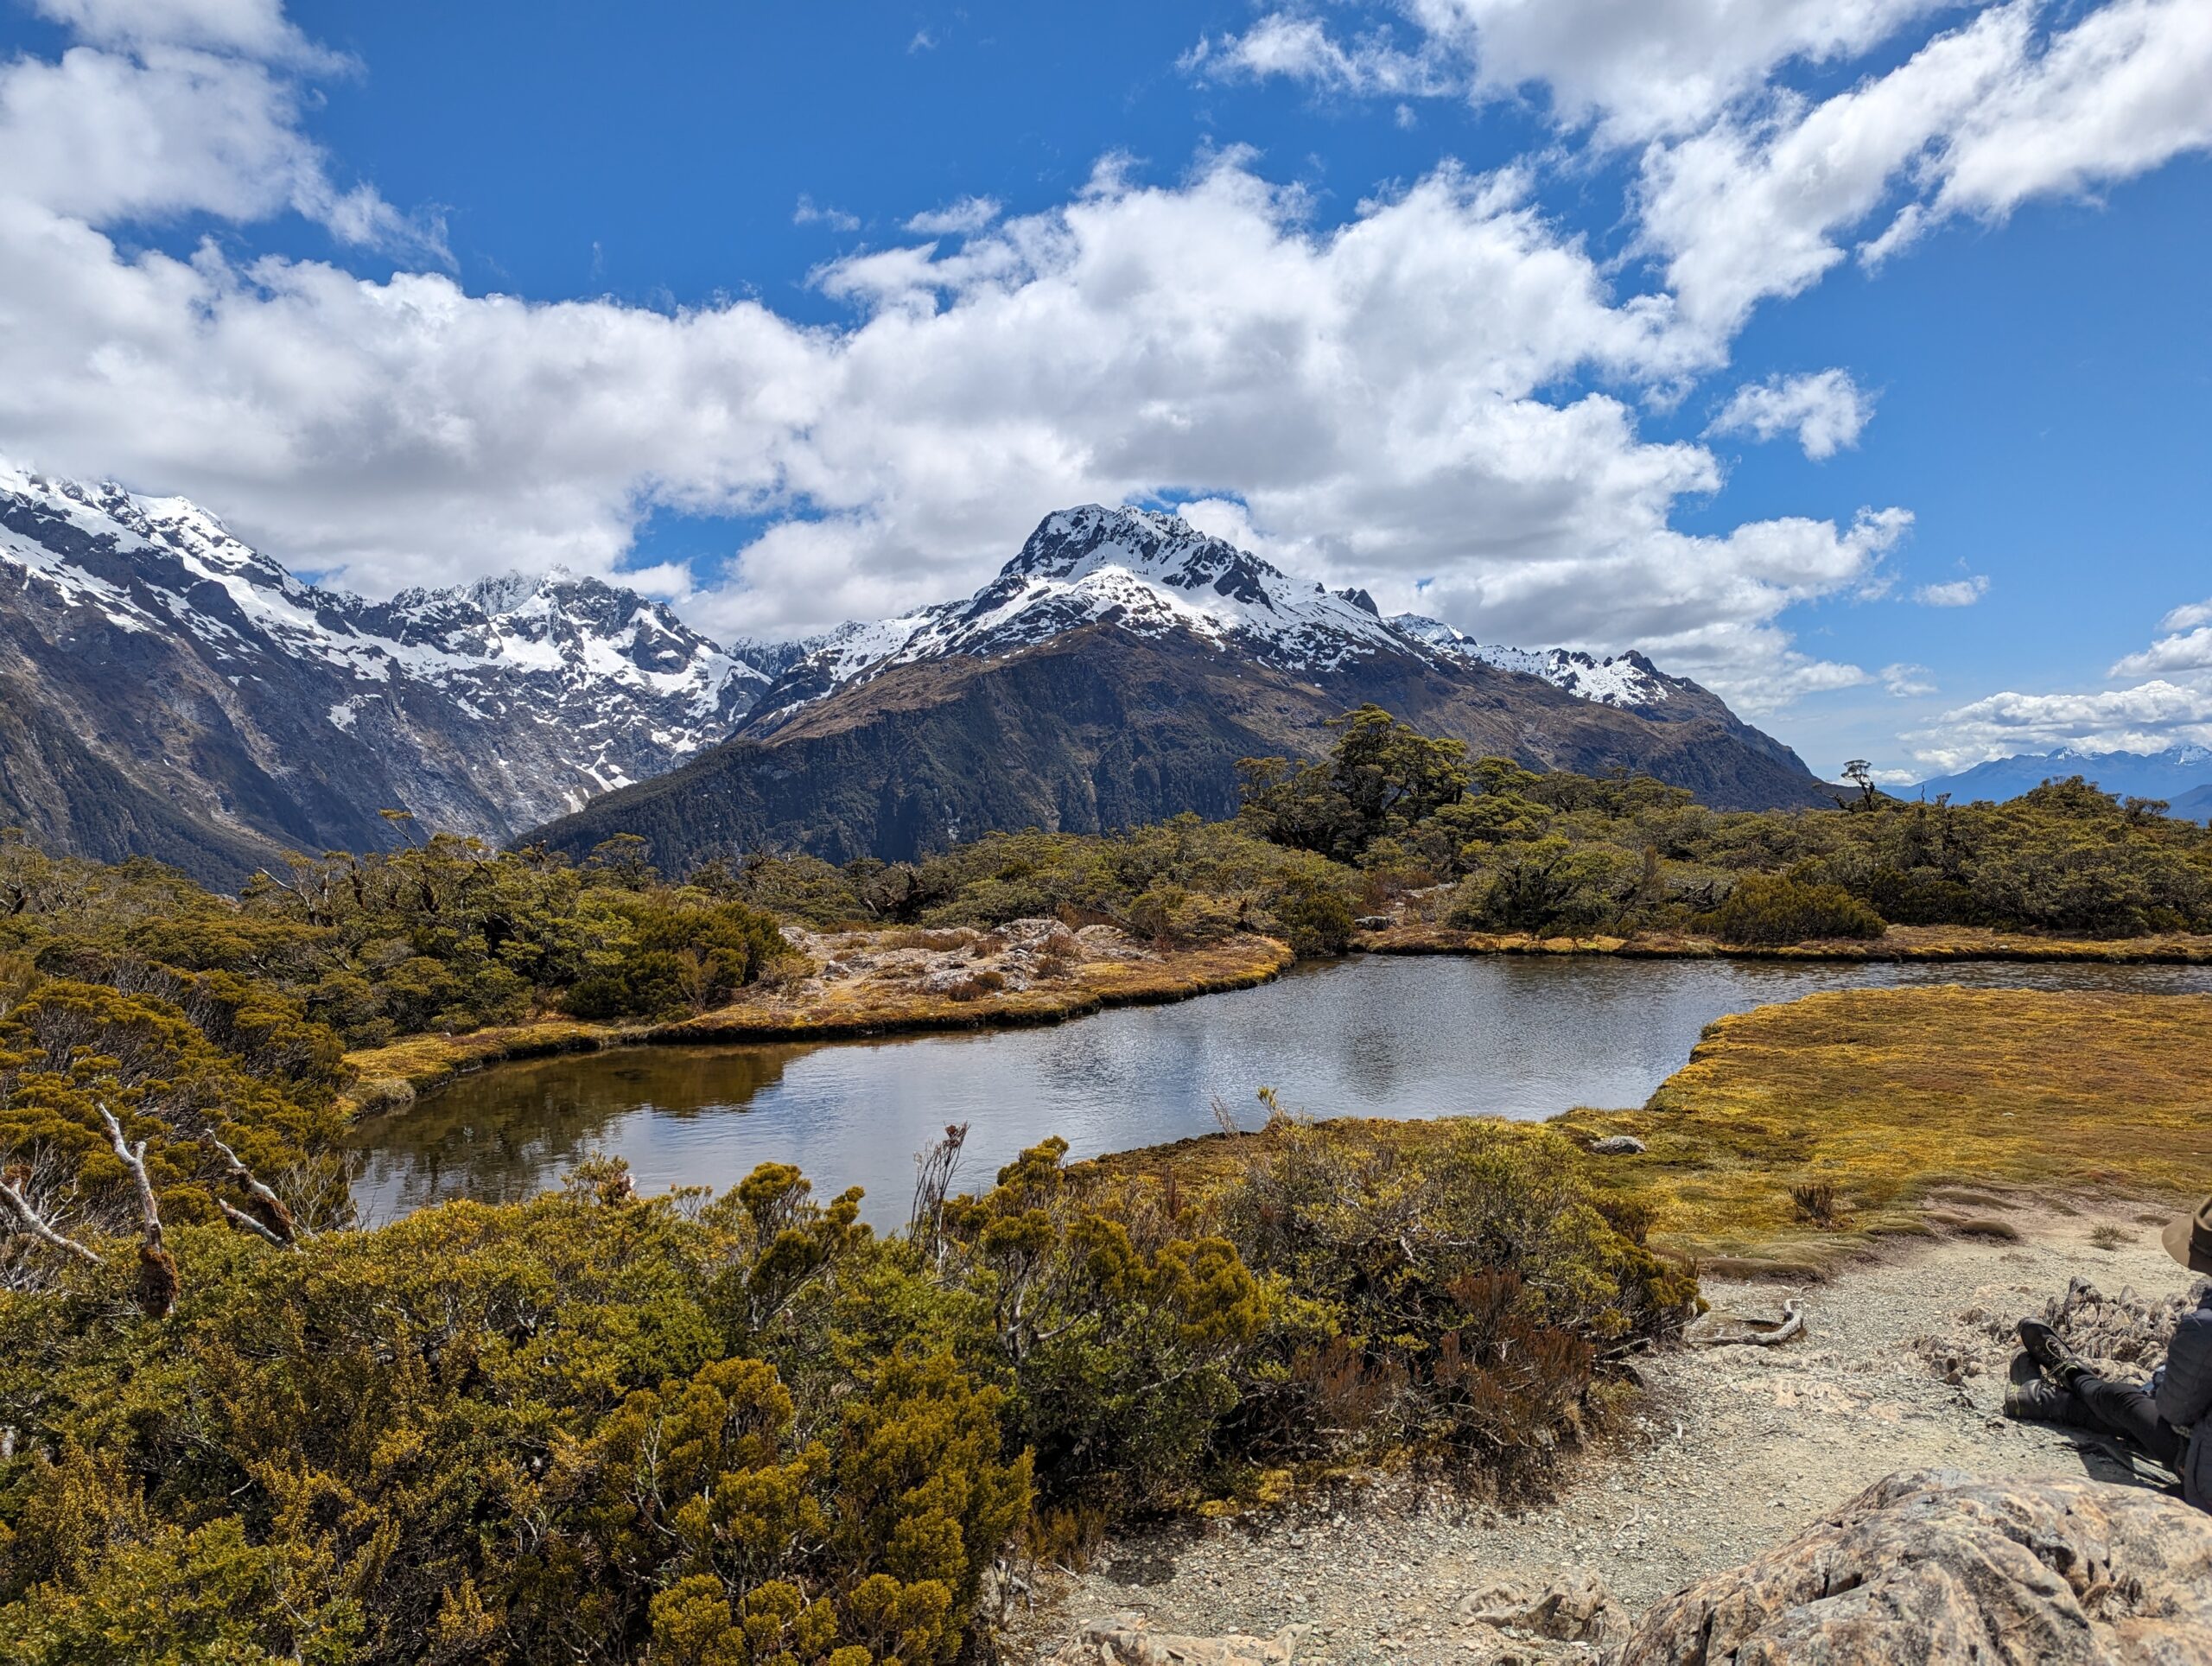 Landscape image of a mountainous Lake Nelson Park in New Zealand - Exploring New Zealand - Adventures in Good Company